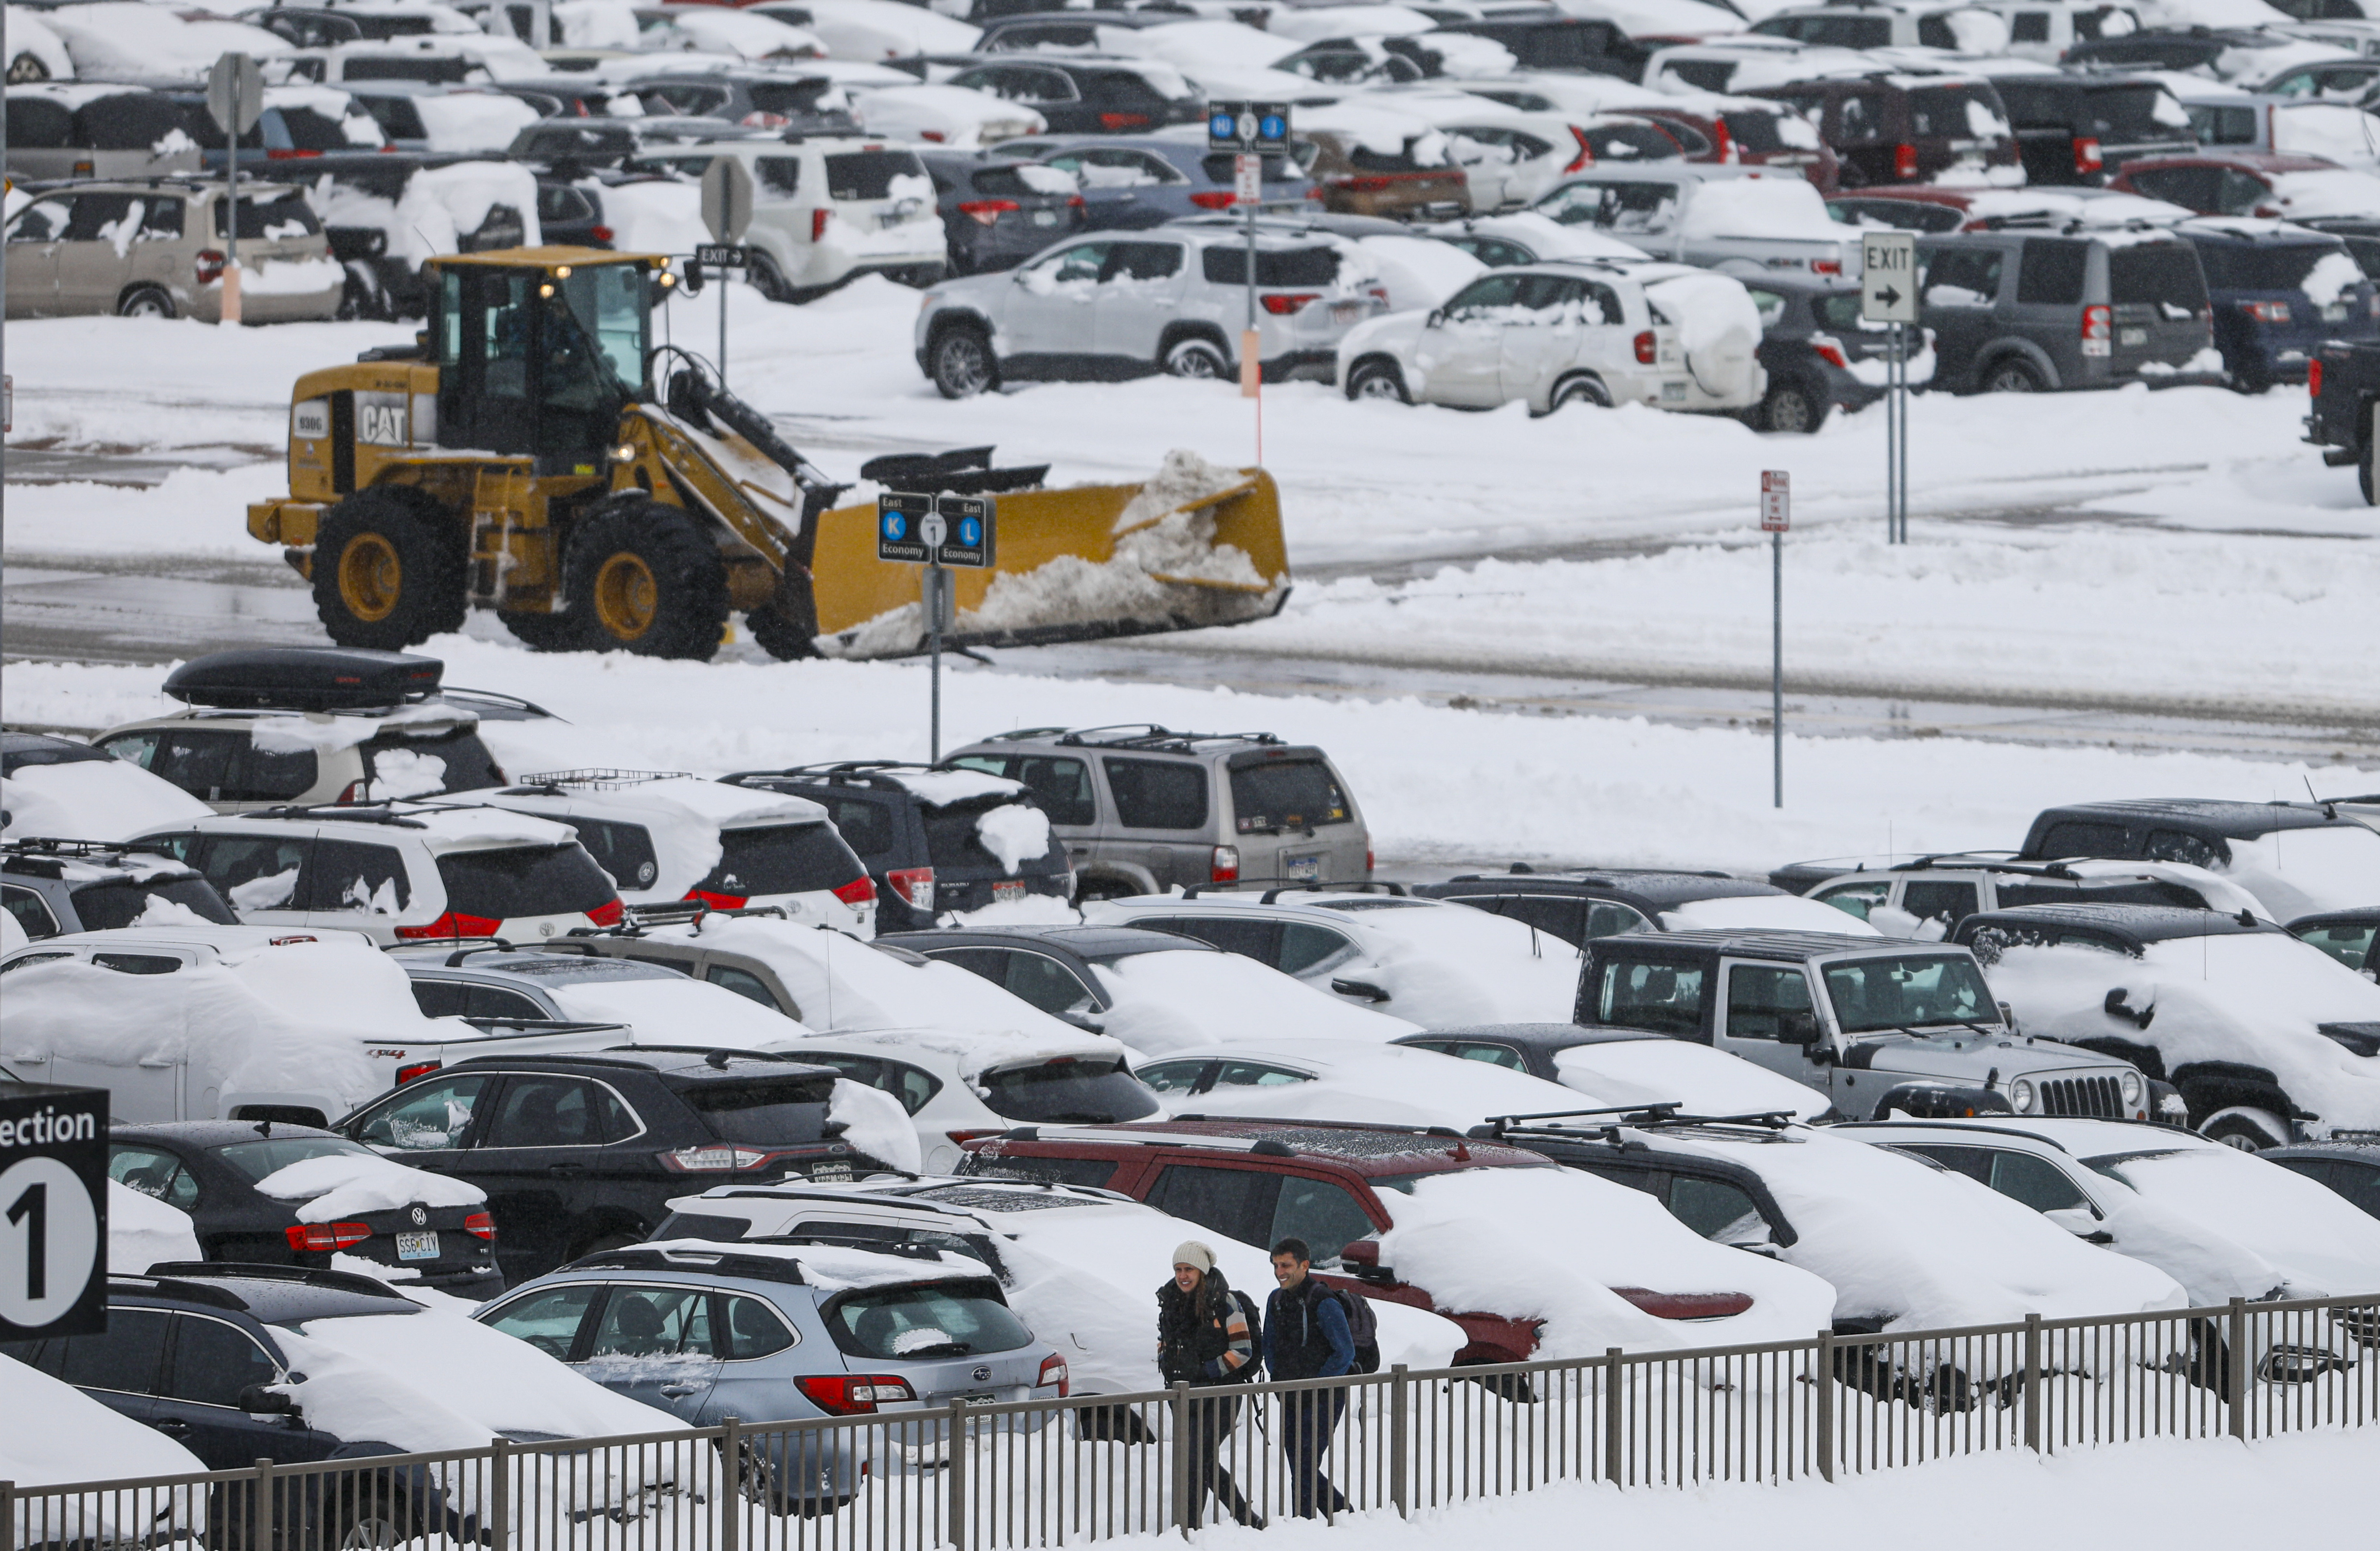 People walk past snow-covered cars parked as a plow clears roadways at Denver International Airport on November 26, 2019 in Denver, Colorado.